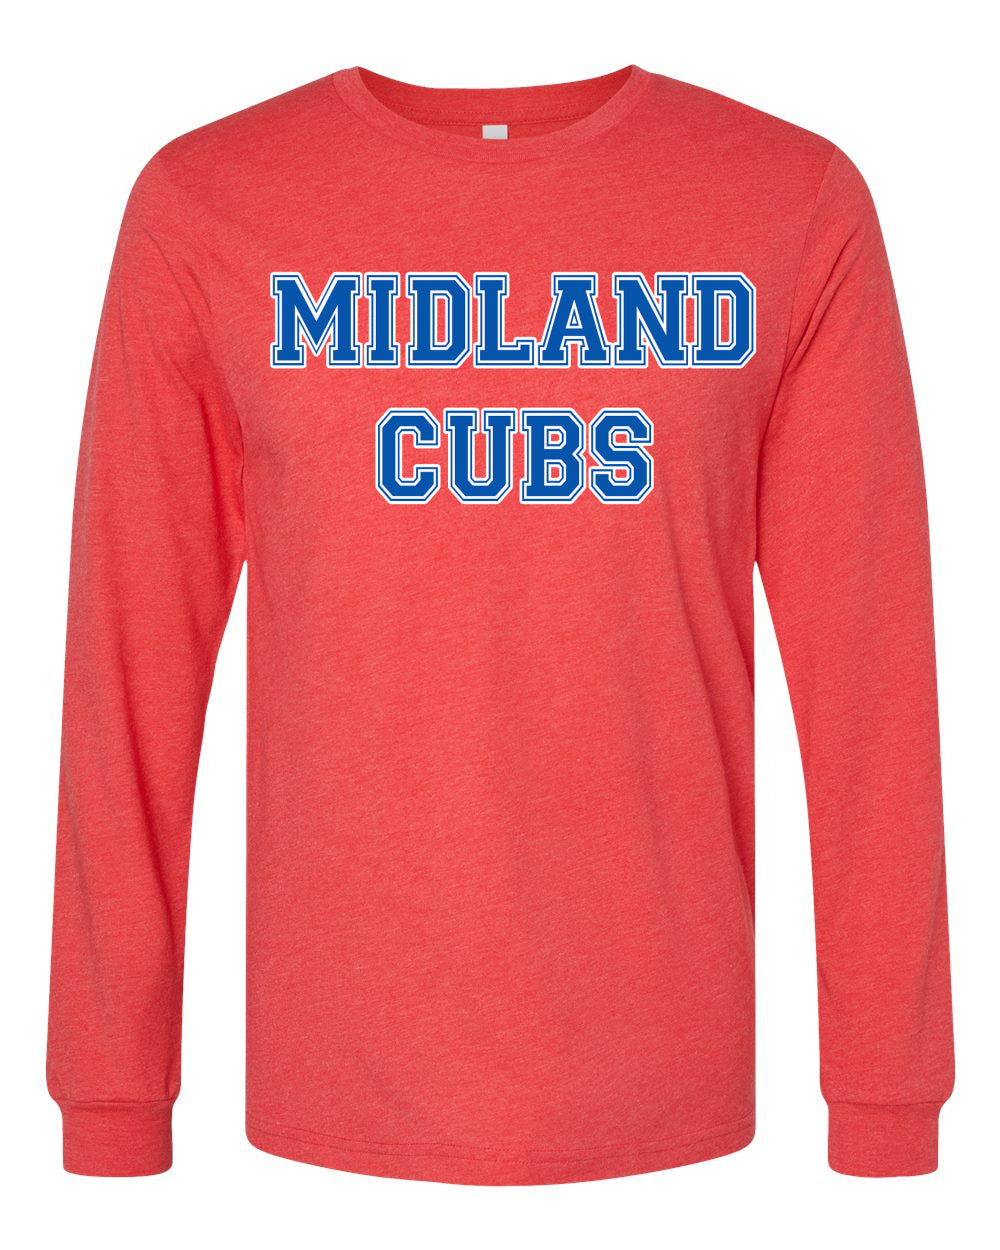 Red Long Sleeved Midland Cubs Soft Style Tee/ Front and Back Printing - Script